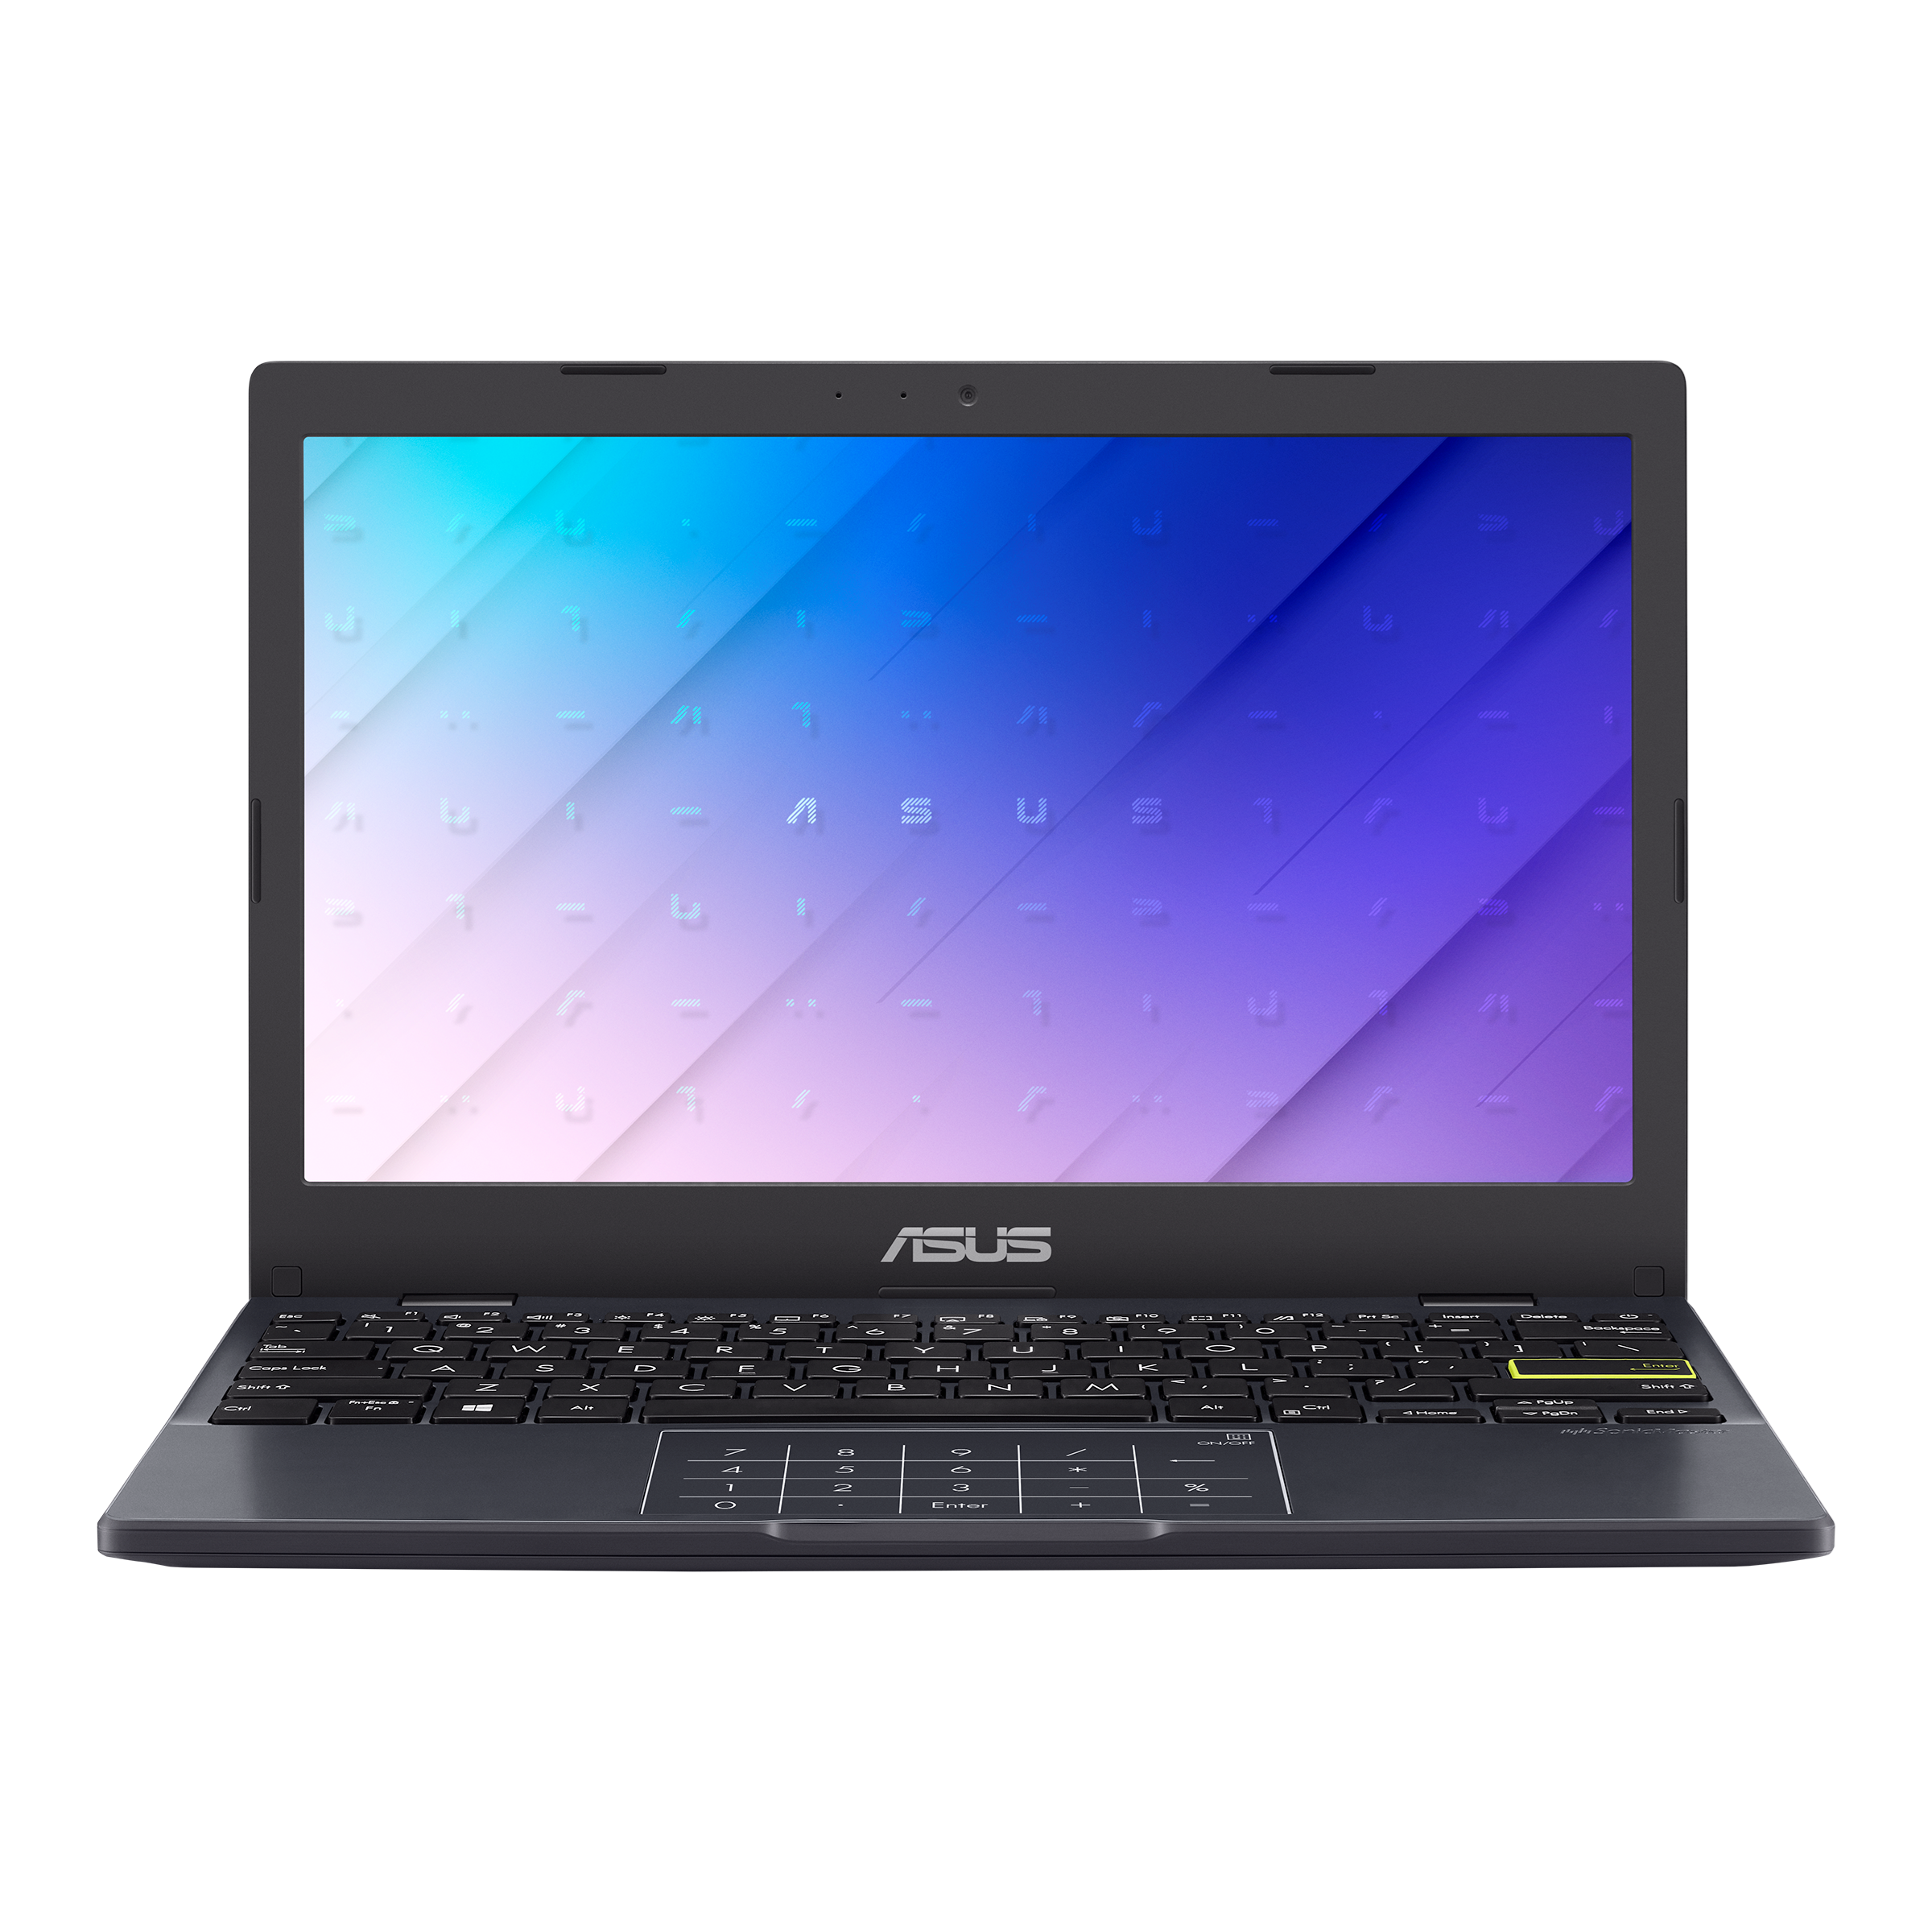 ASUS Laptop｜Laptops For Home｜ASUS USA